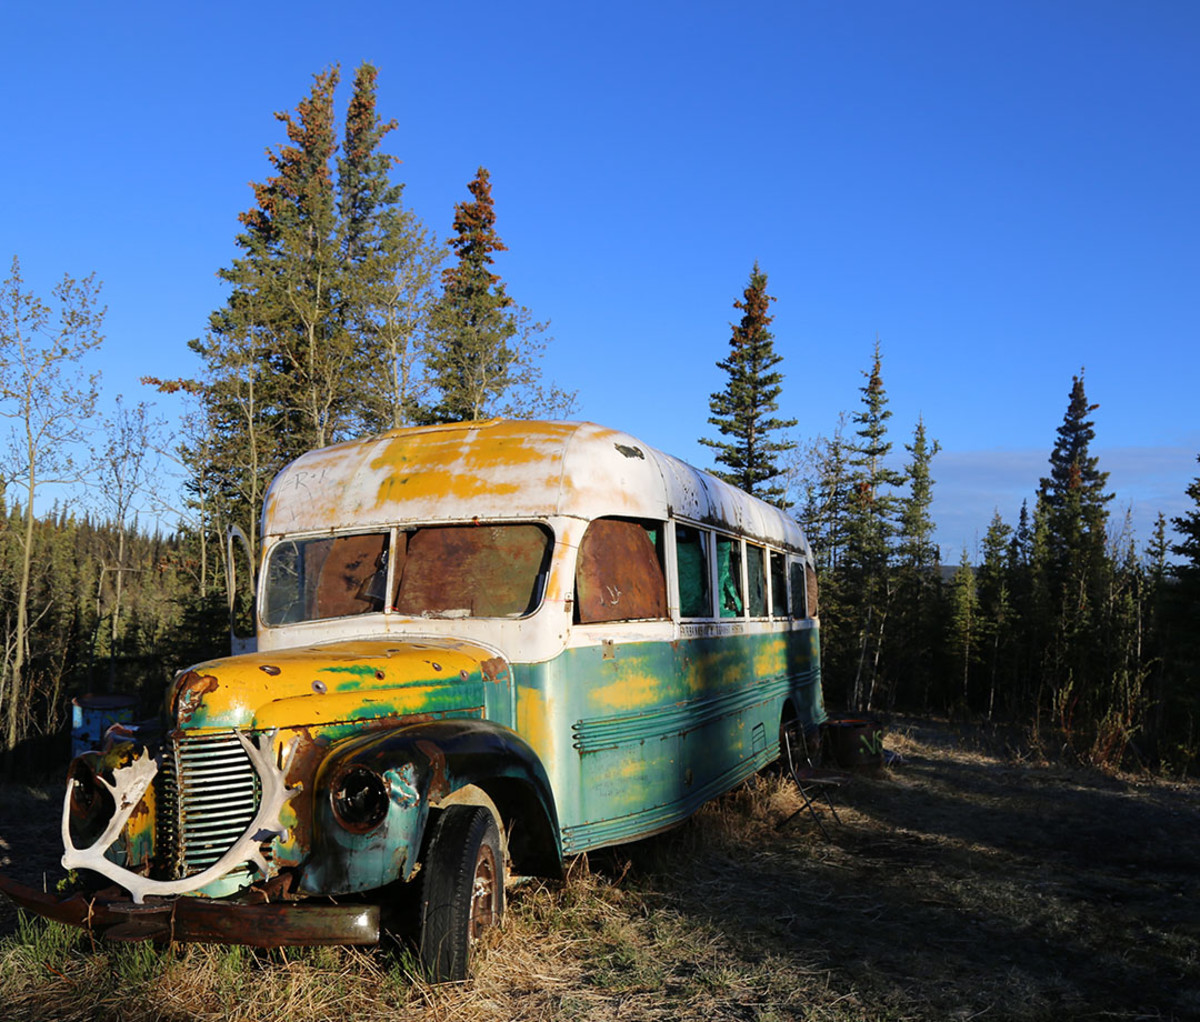 The Alaskan forest where Chris McCandless spent his last days in 1993